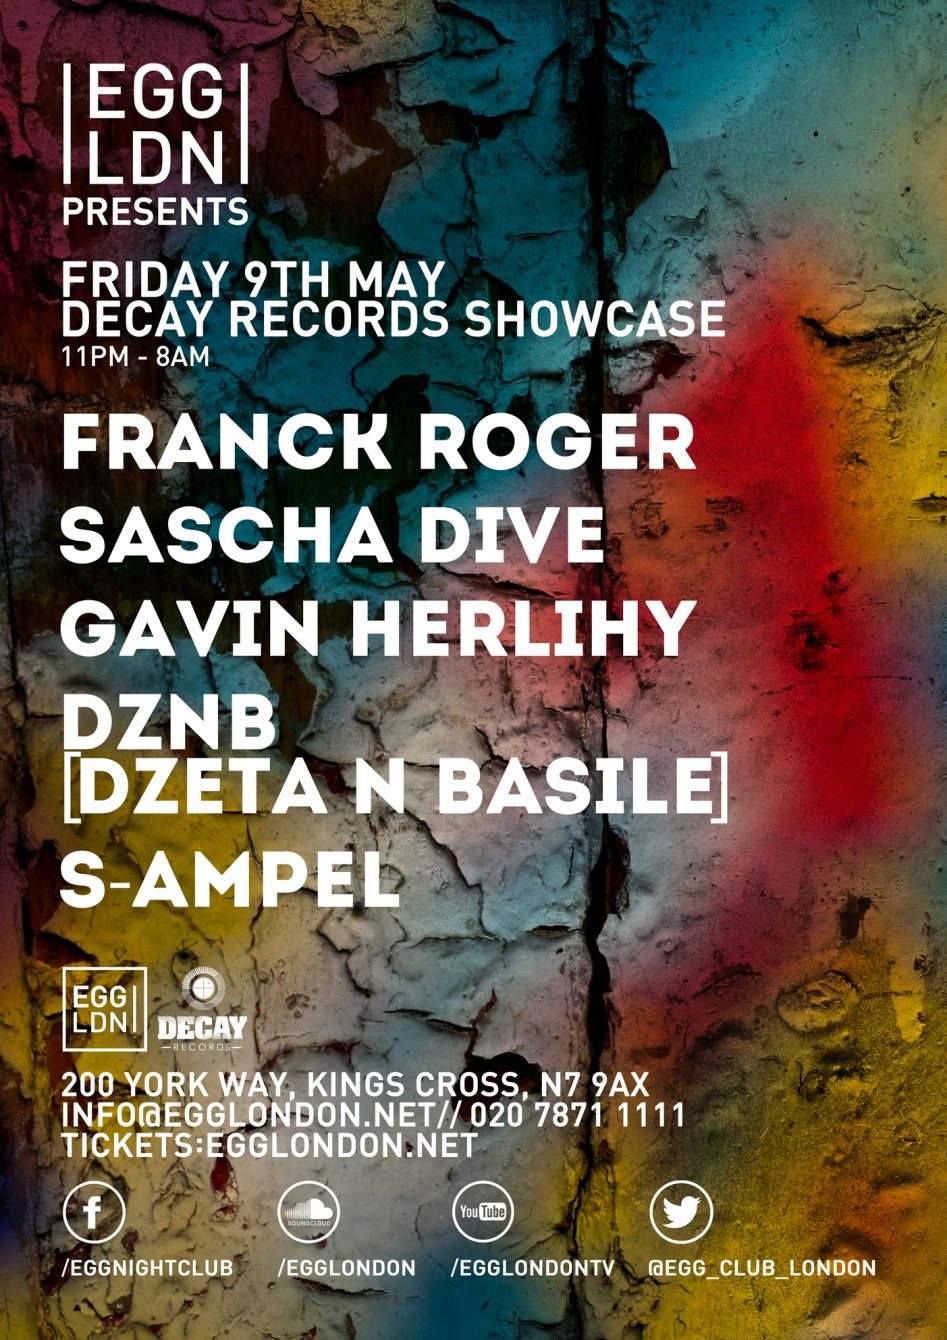 Egg presents: Decay Records with Franck Roger, Sascha Dive & Gavin Herlihy - フライヤー表